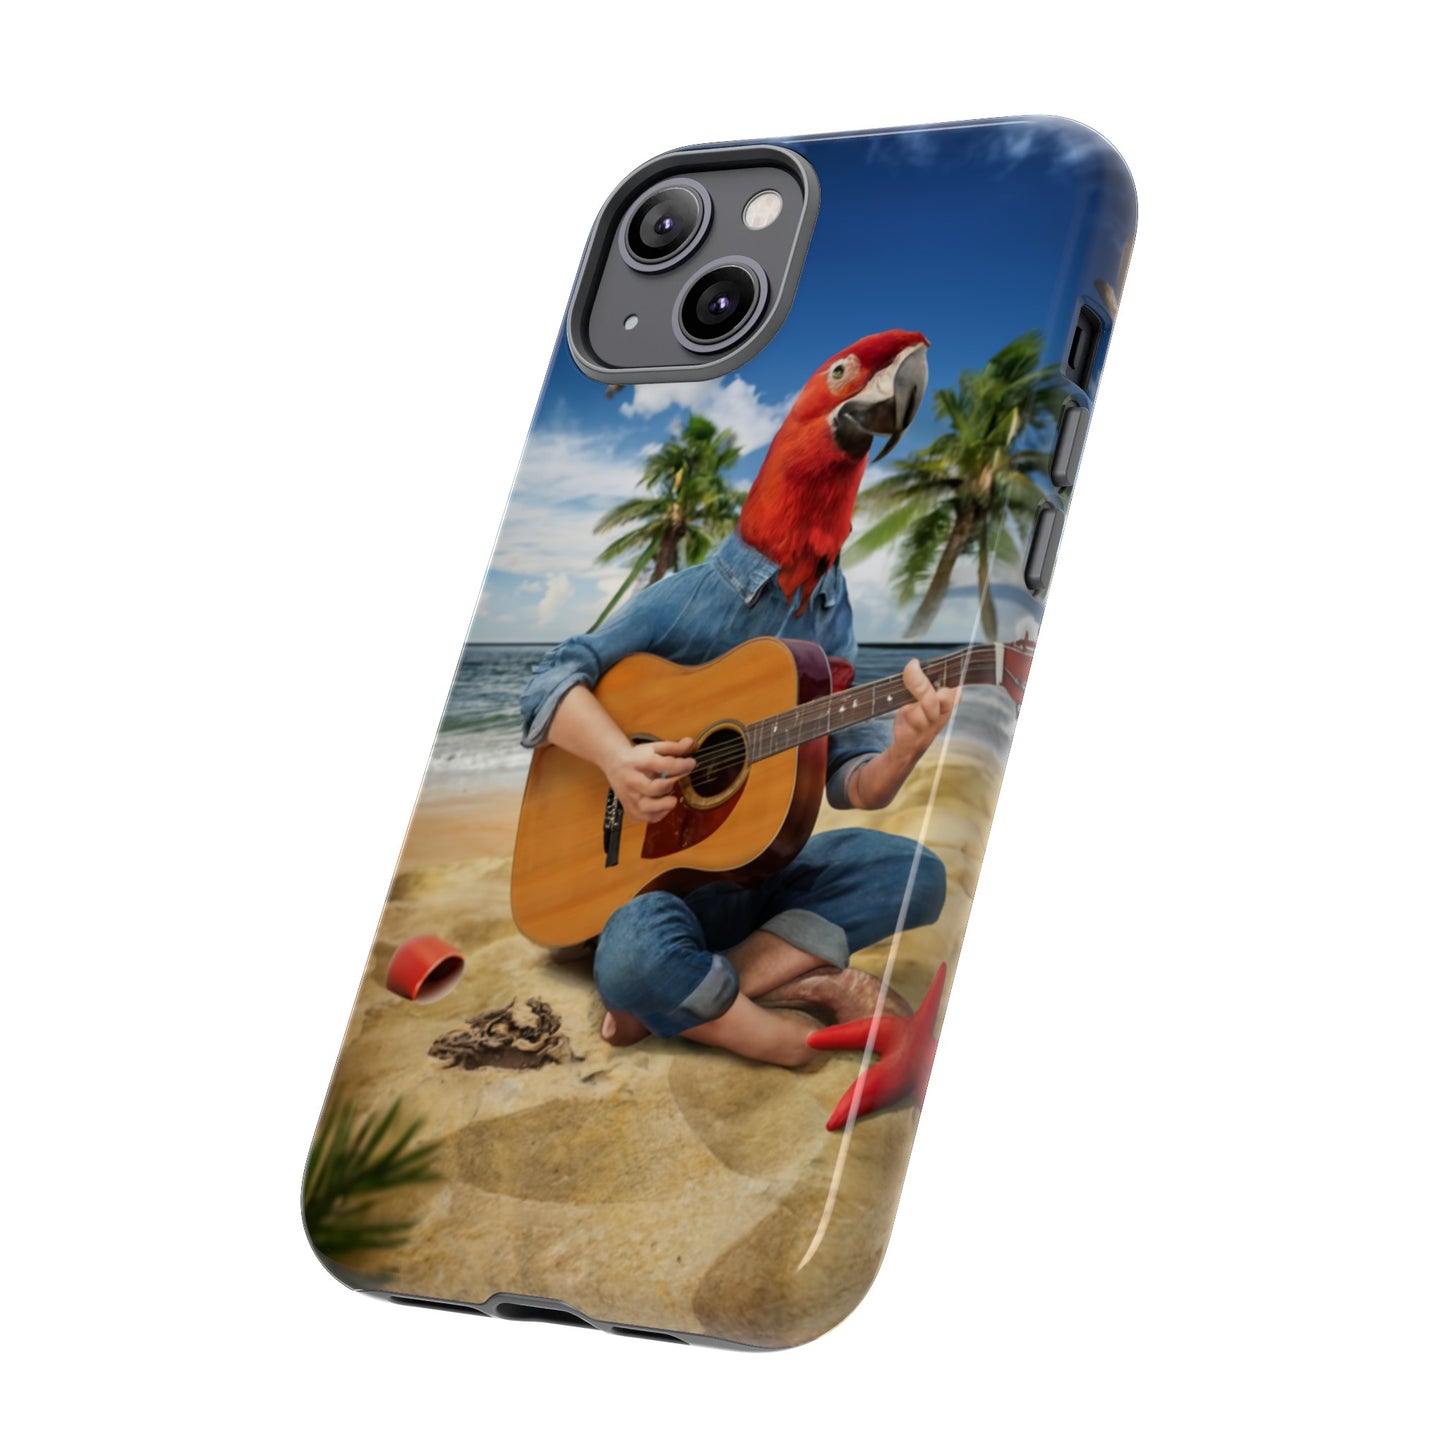 Tropical Serenade Red Parrot Man with Guitar Design Protective Phone Case